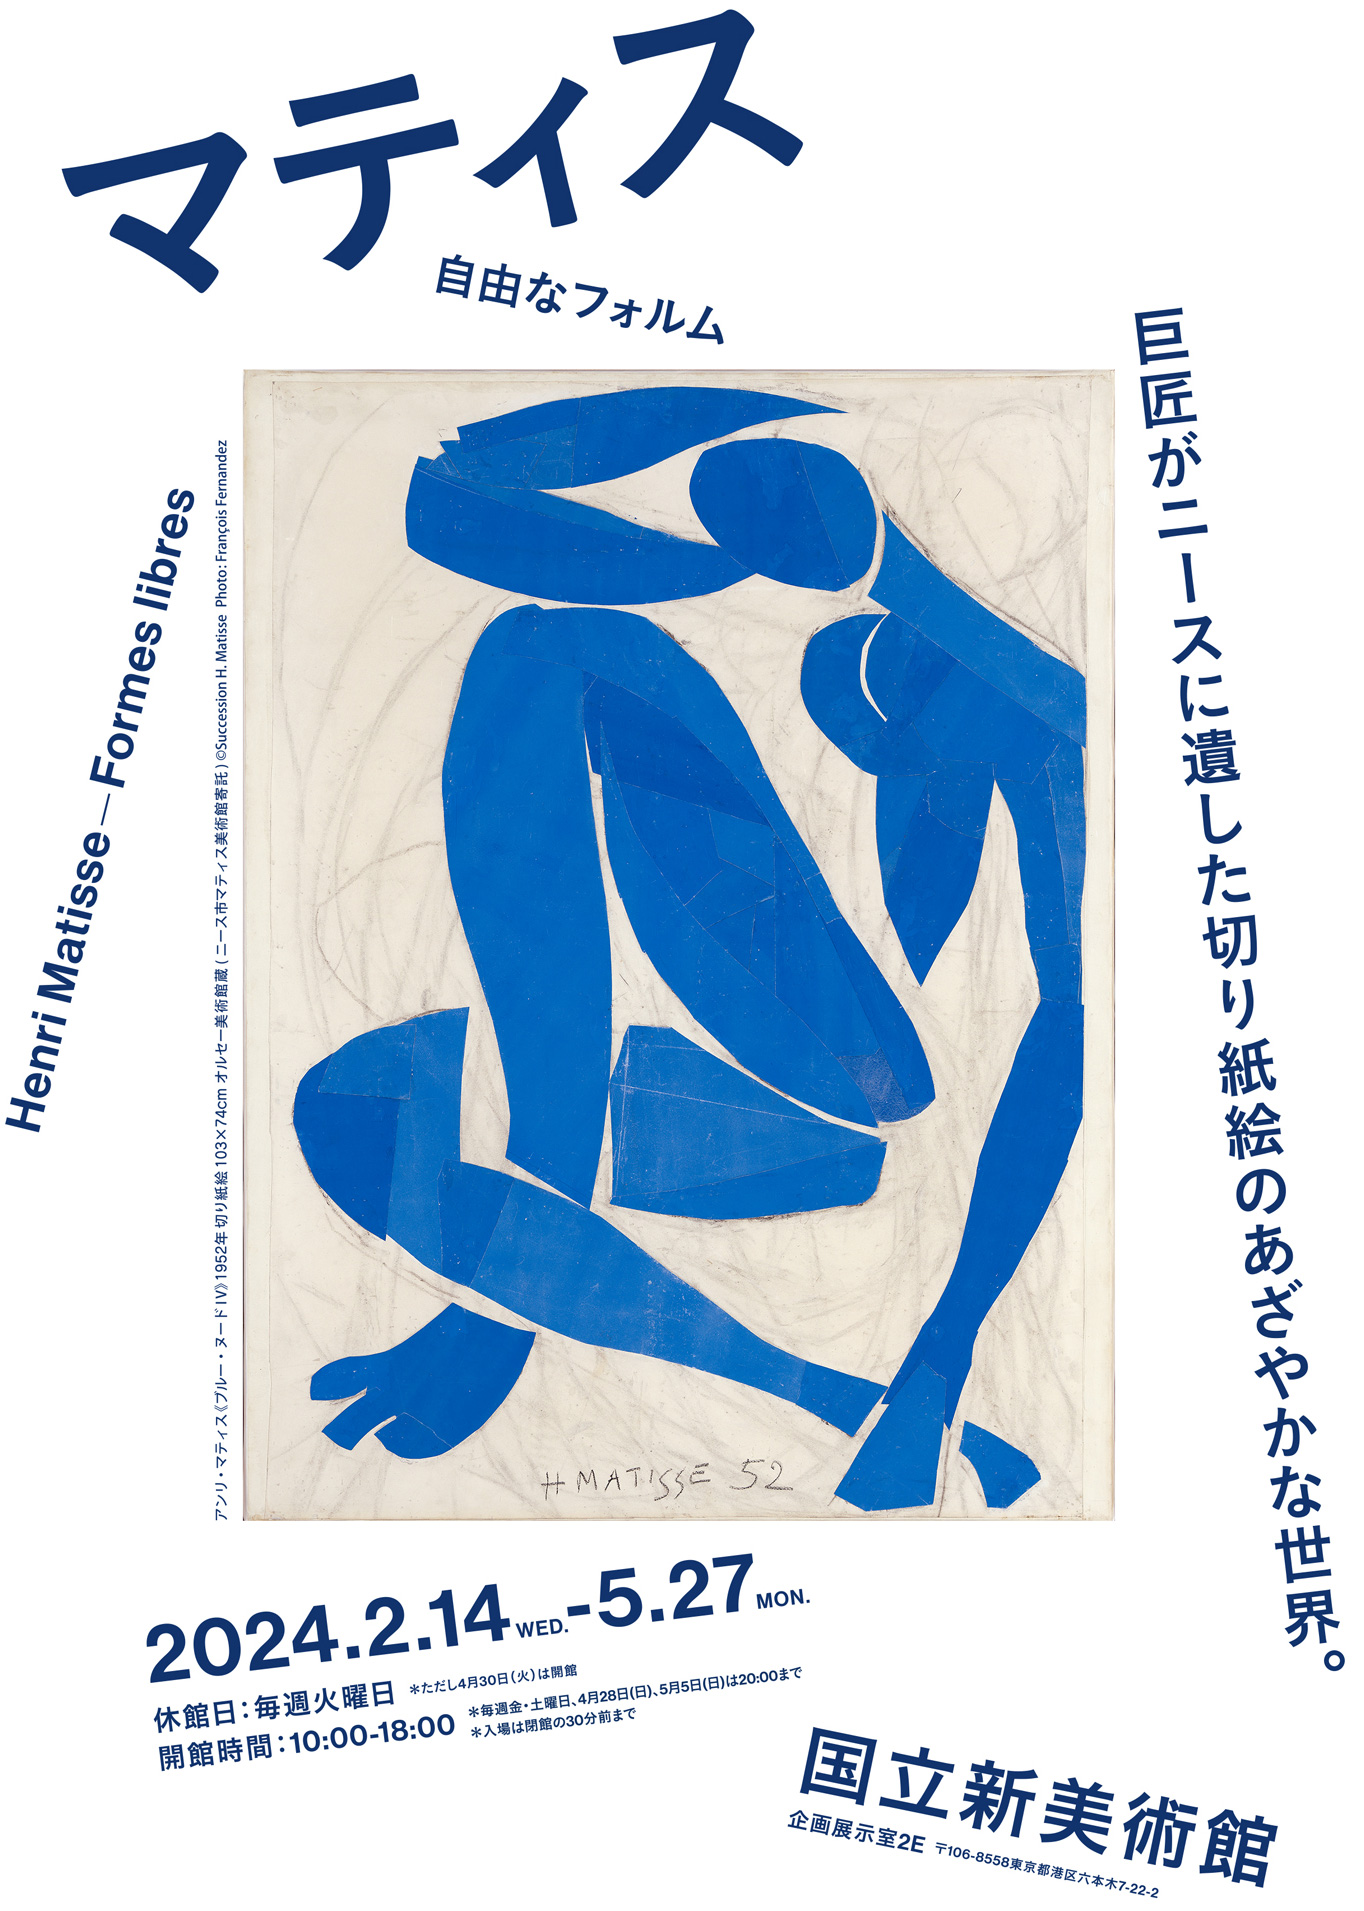 Matisse's last major work 《Flowers and Fruits》 is exhibited for the first time in Japan. Henri Matisse – Forms in Freedom will be held at The National Art Center, Tokyo from Wed, Februaly 14 to Monday, May 27, 2024.